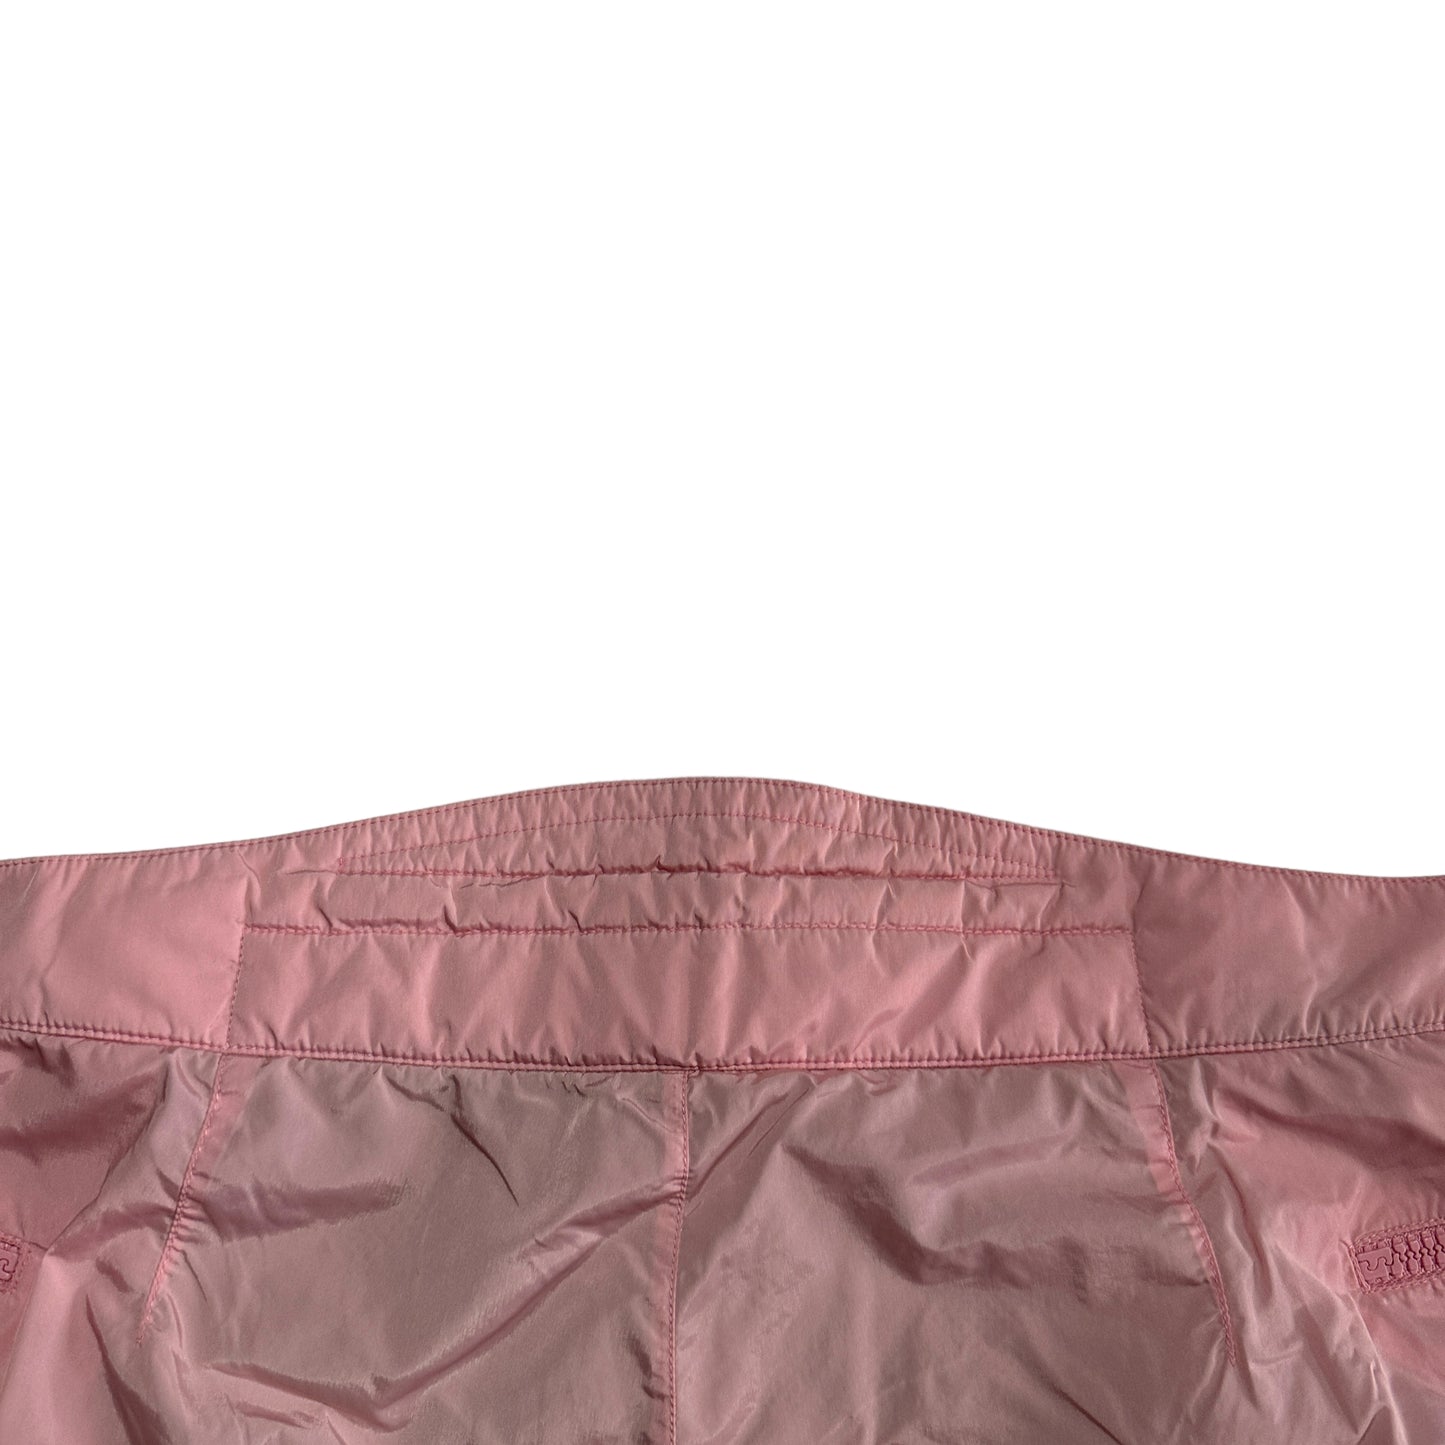 S/S 2000 Pink Shorts (40W)